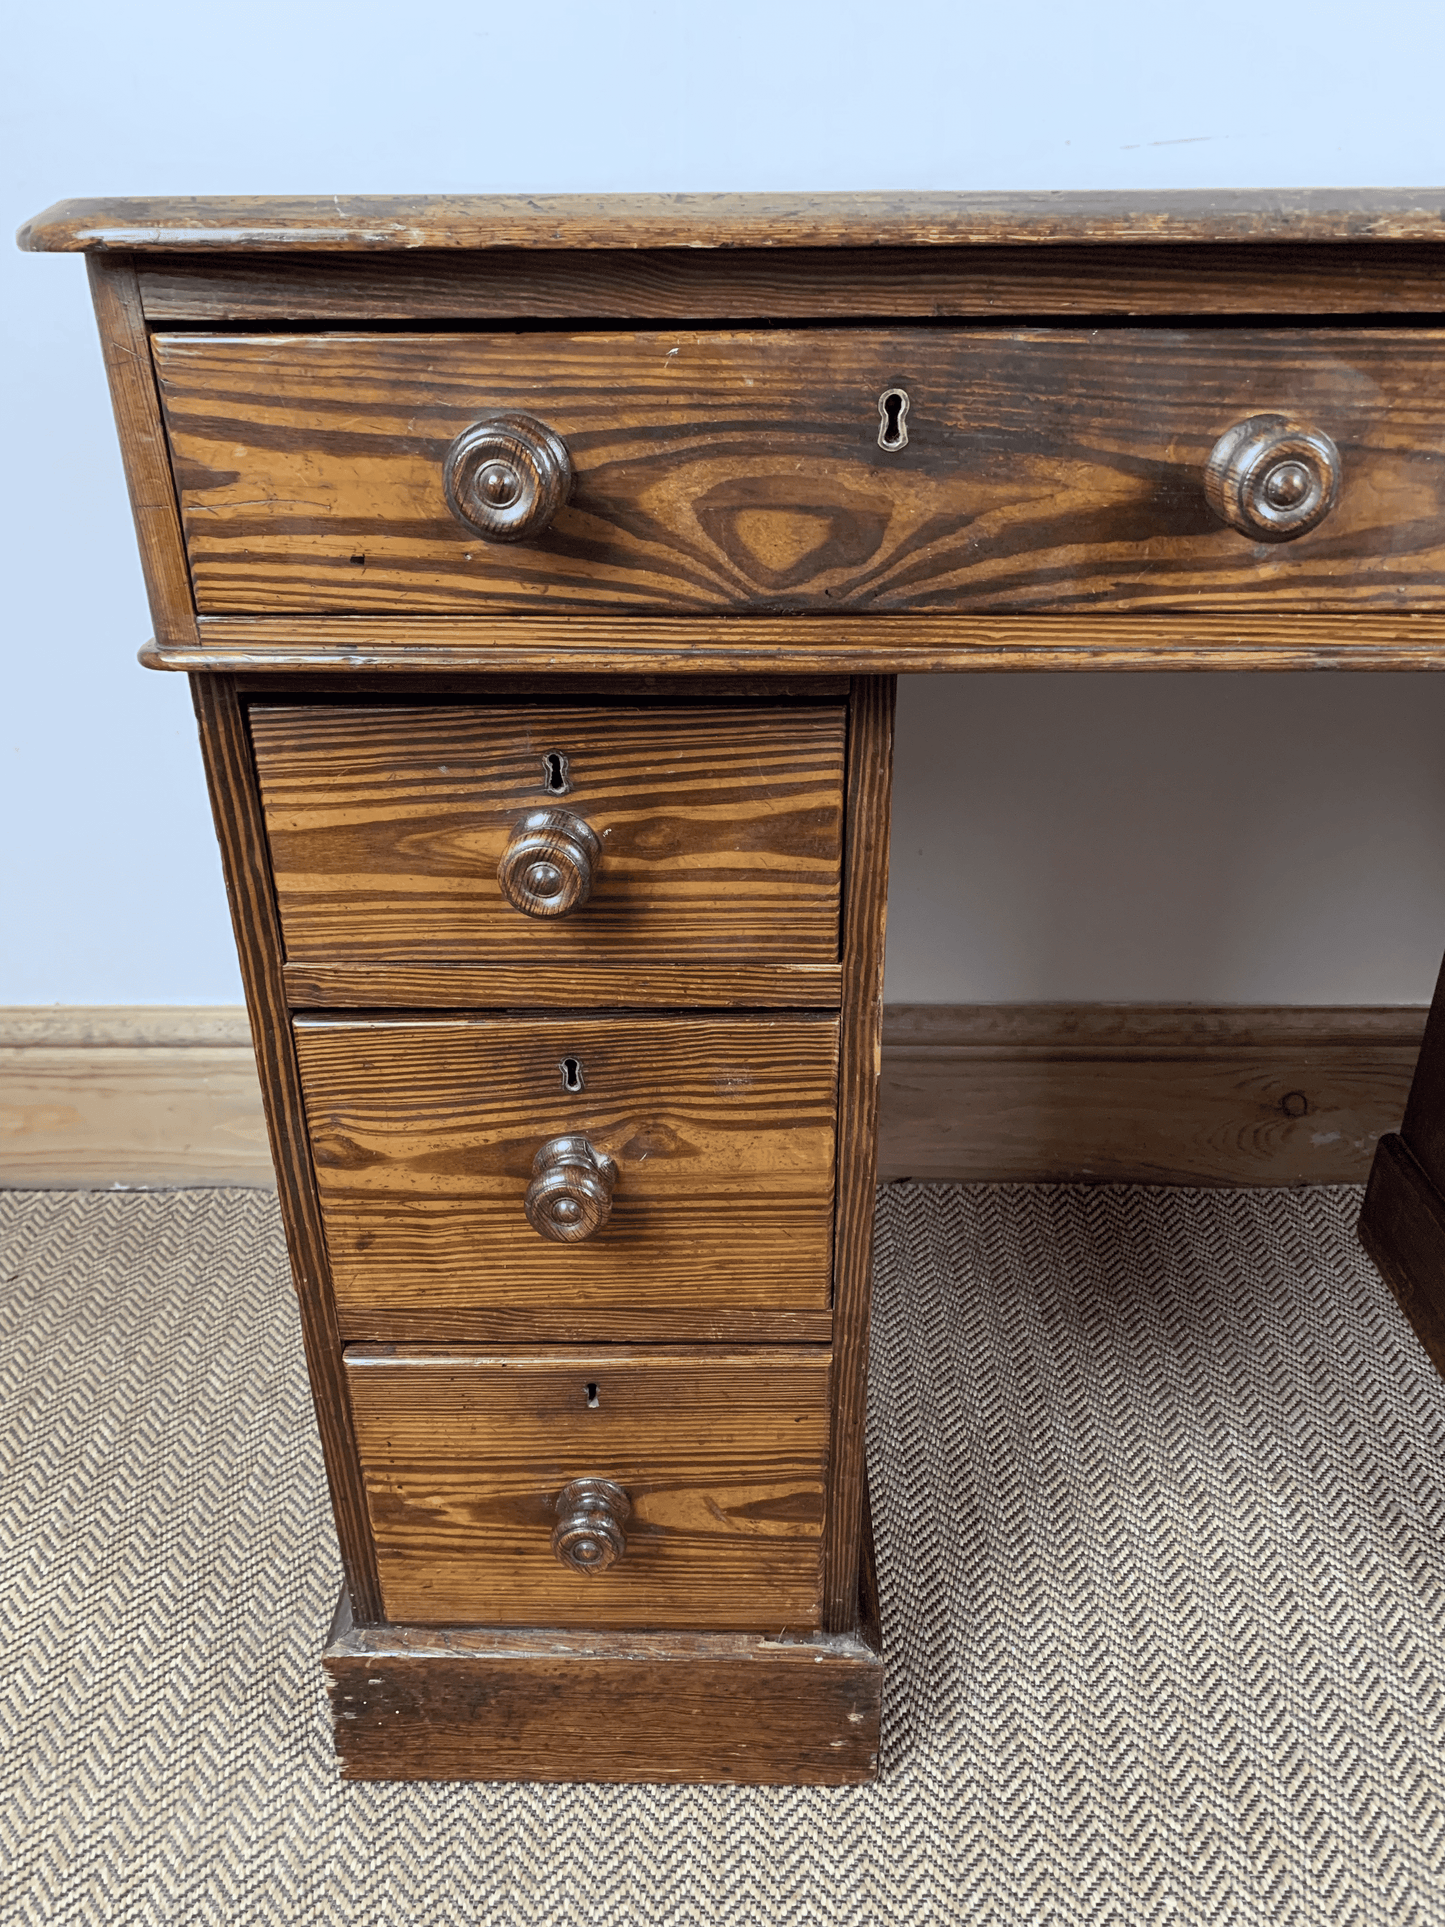 Antique Victorian Pitch Pine Desk - Timeless Elegance with Original Leather Top